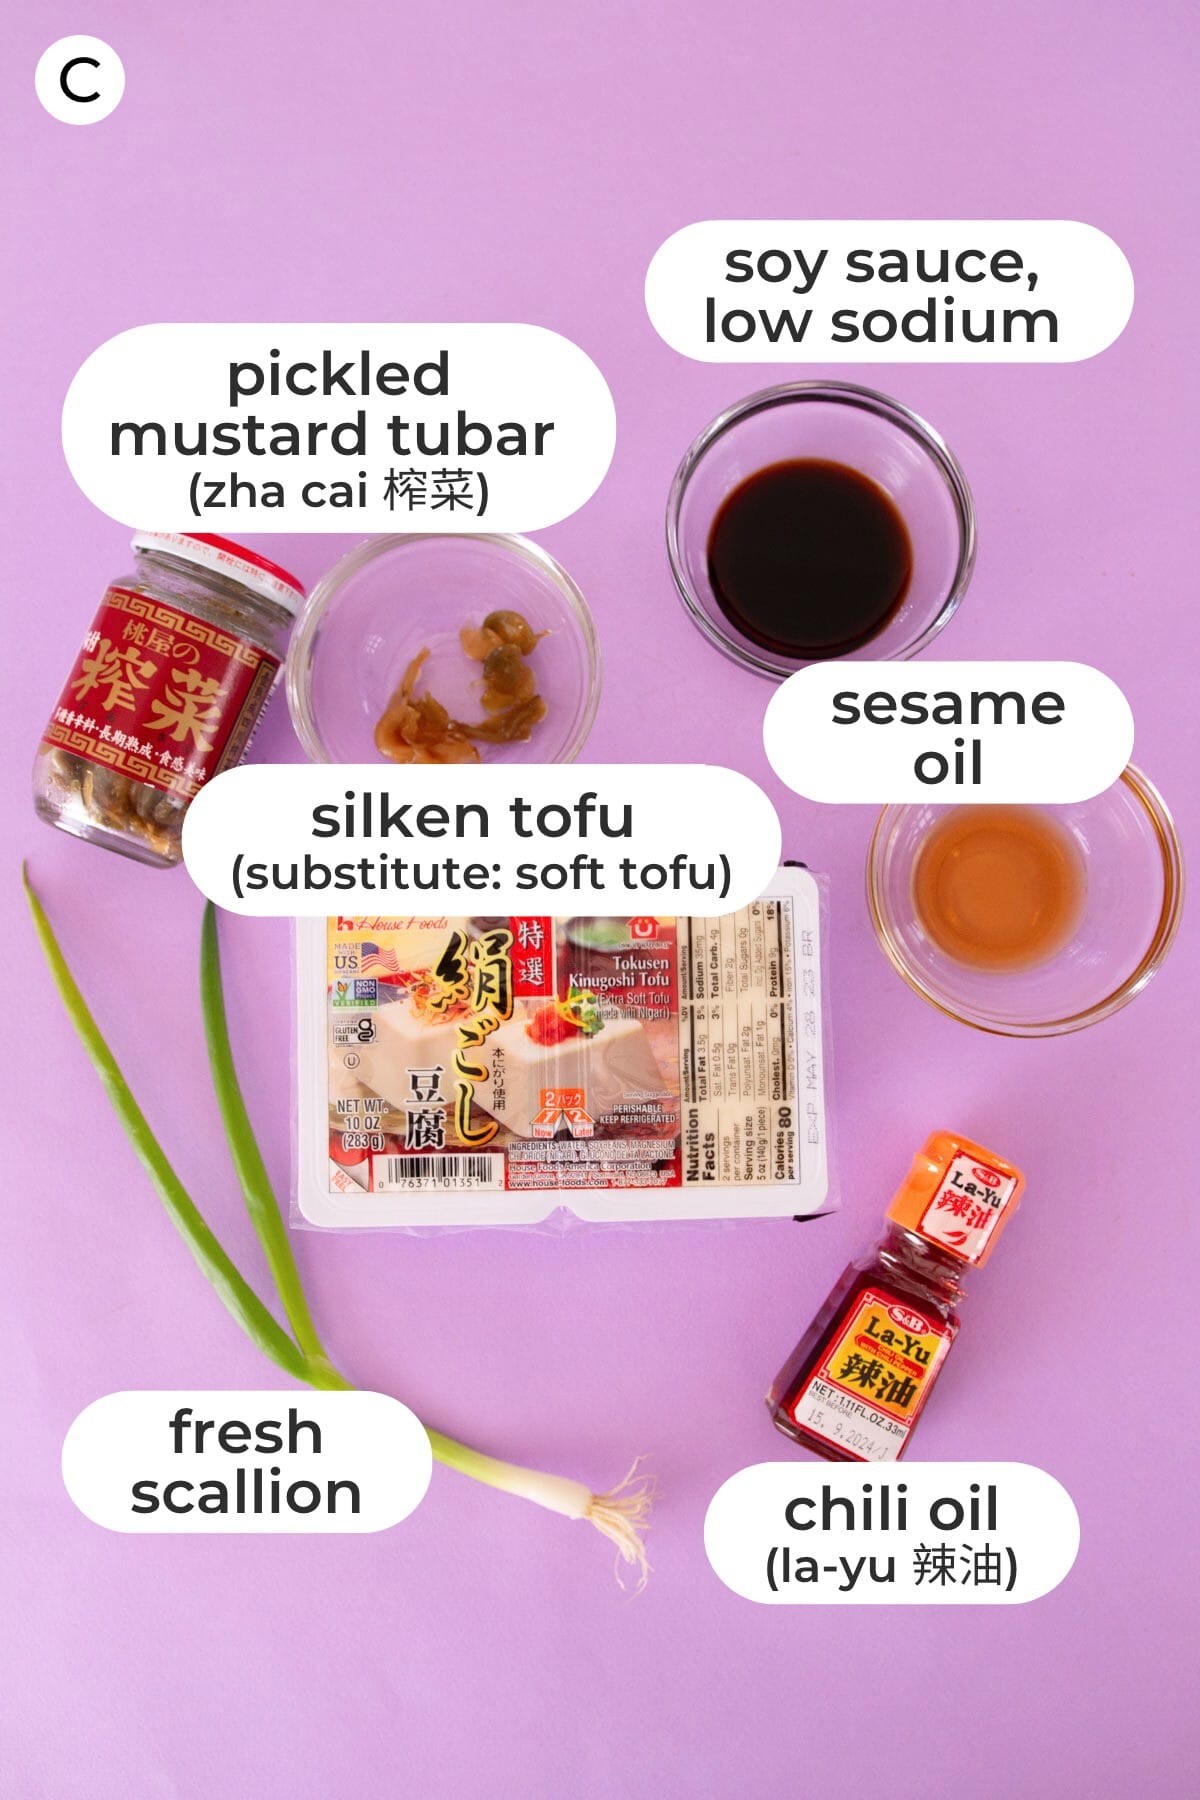 Ingredients of silken tofu with Japanese chili oil topping laid out over a purple background and labeled with a "C" as well as the ingredient names: pickled mustard tubar (zha cai 榨菜), sesame oil, silken tofu (substitute: soft tofu), sesame oil, fresh scallion, and chili oil (la-yu 辣油).